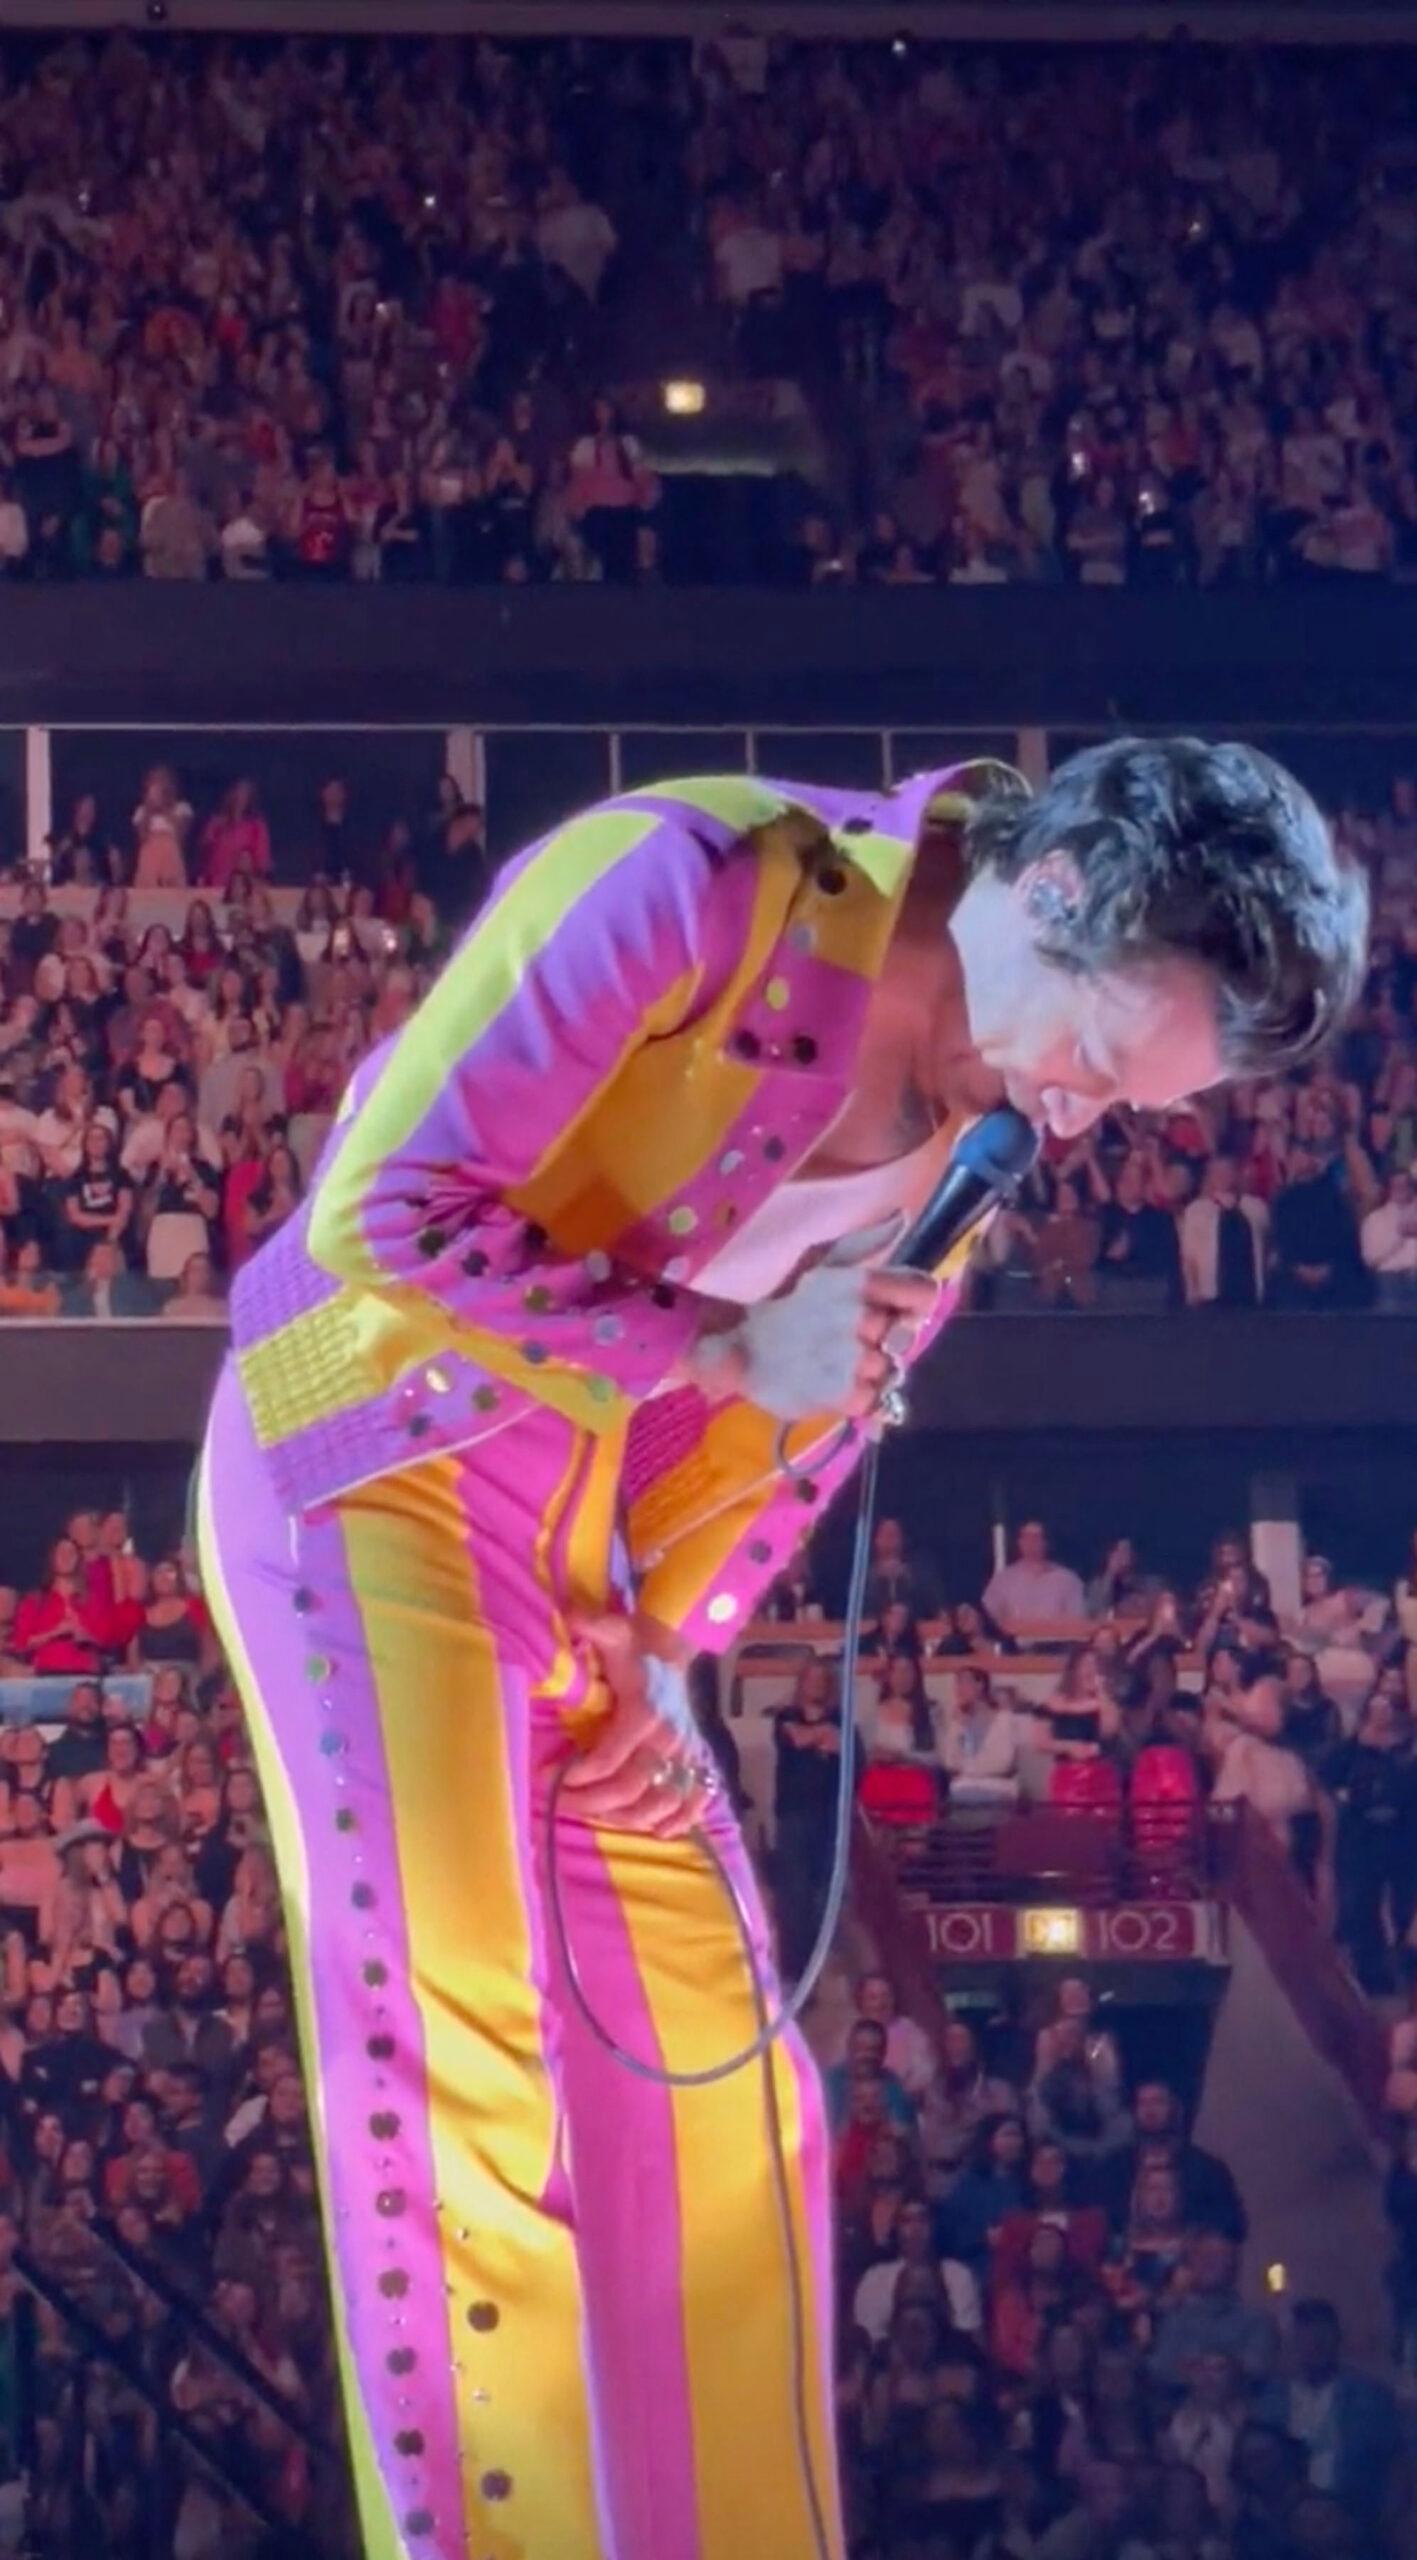 This is the eye-watering moment Harry Styles got hit where it hurts by an object thrown on stage by an over-enthusiastic fan. 